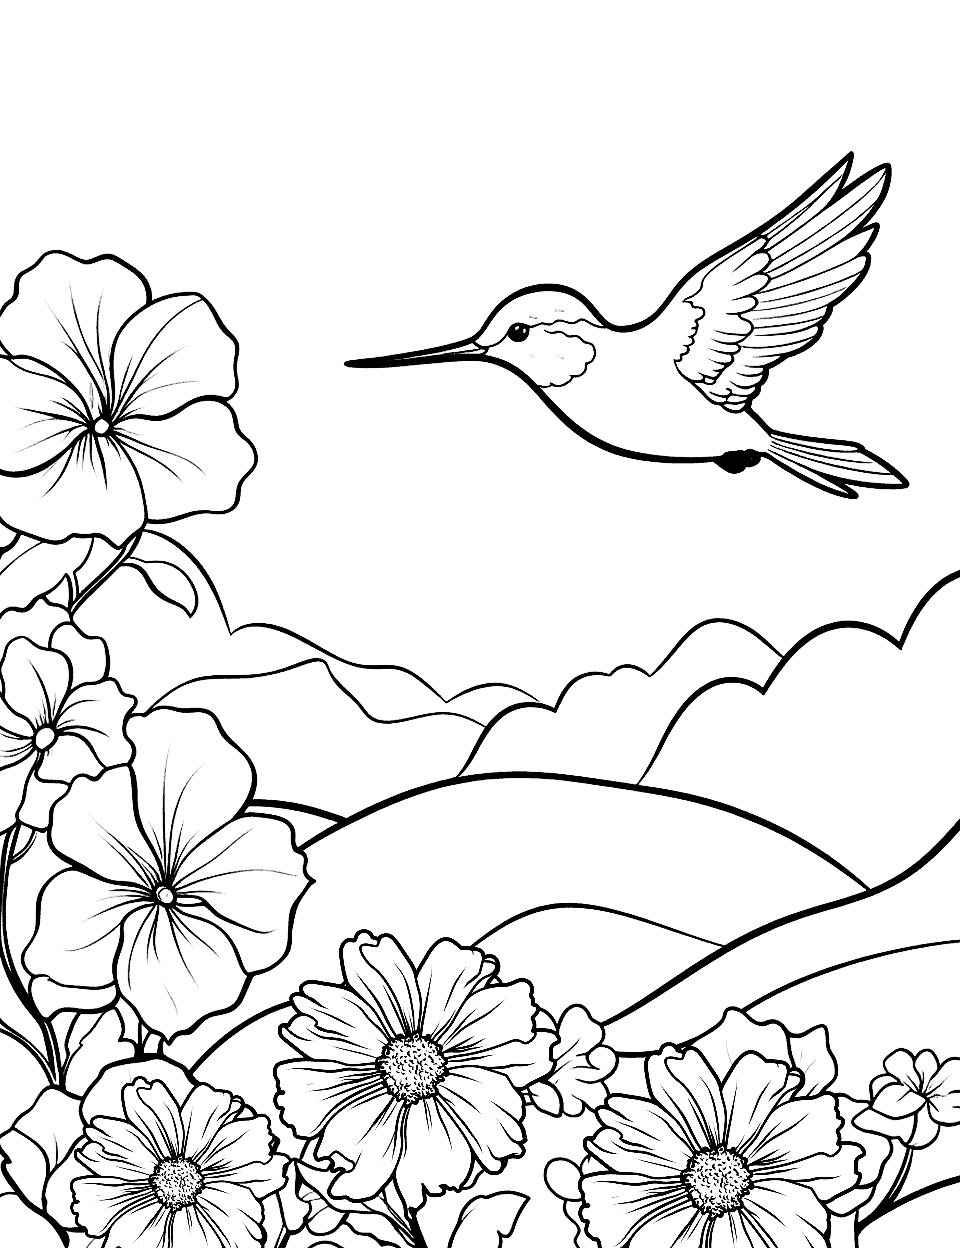 Hummingbird Near a Blossom Nature Coloring Page - A hummingbird hovering close to blooming flowers.